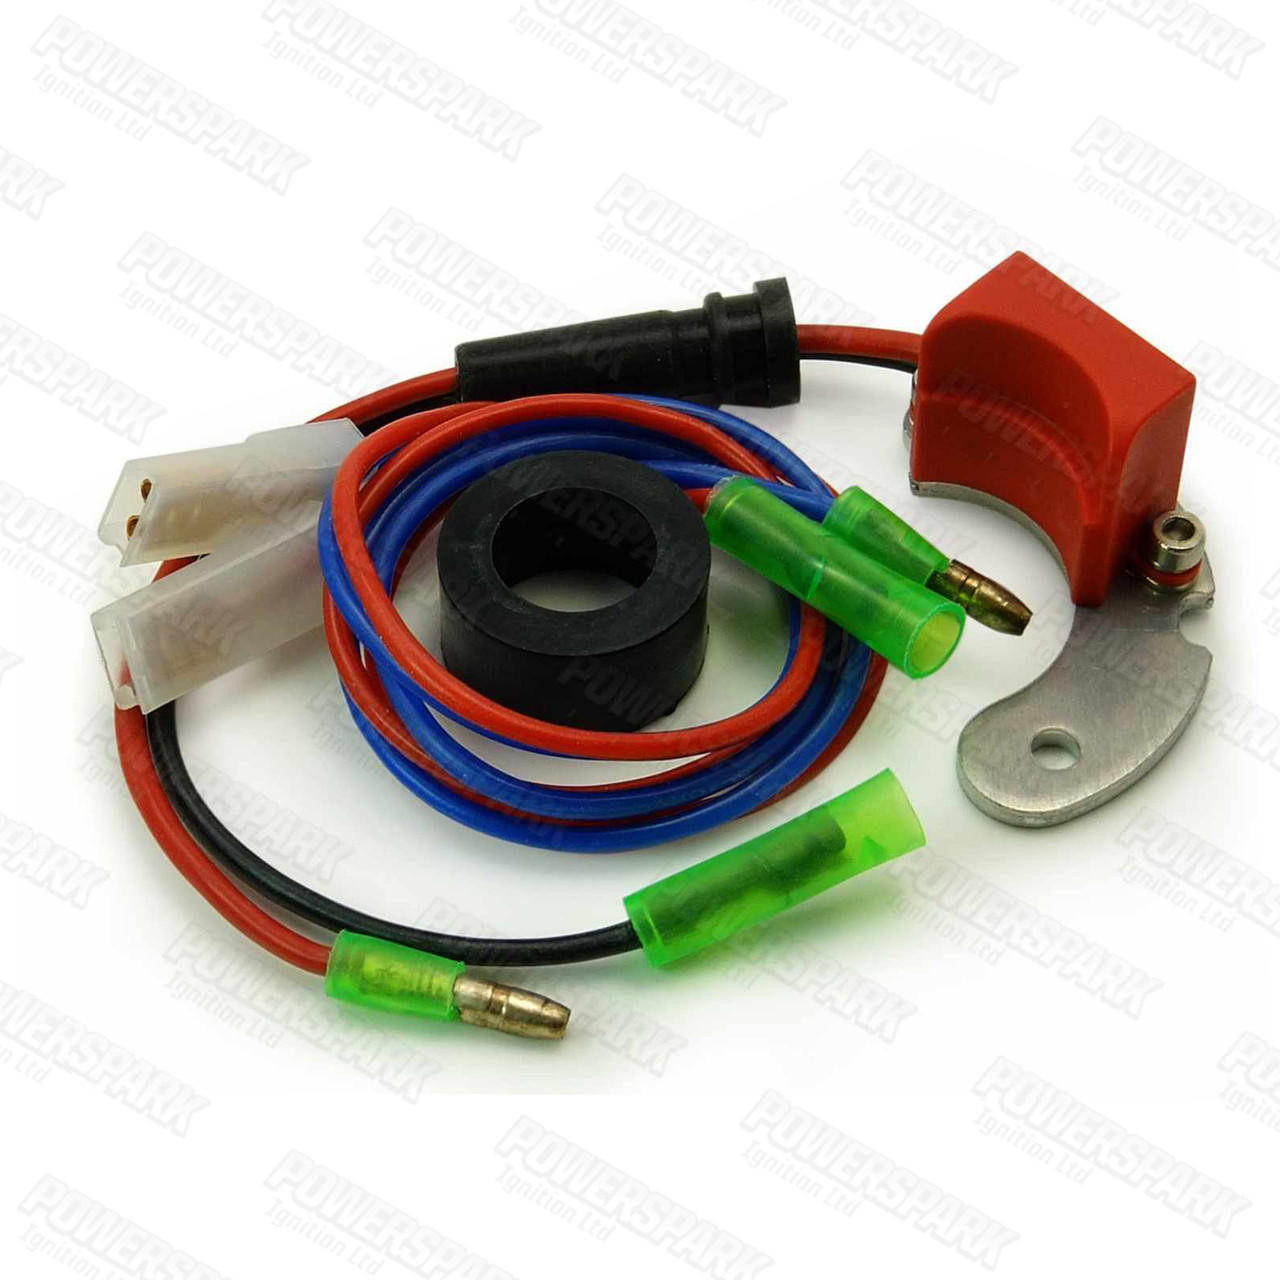  Powerspark Electronic Ignition Kit for Bosch 6 Cyl LH 2PC Distributor (K22)